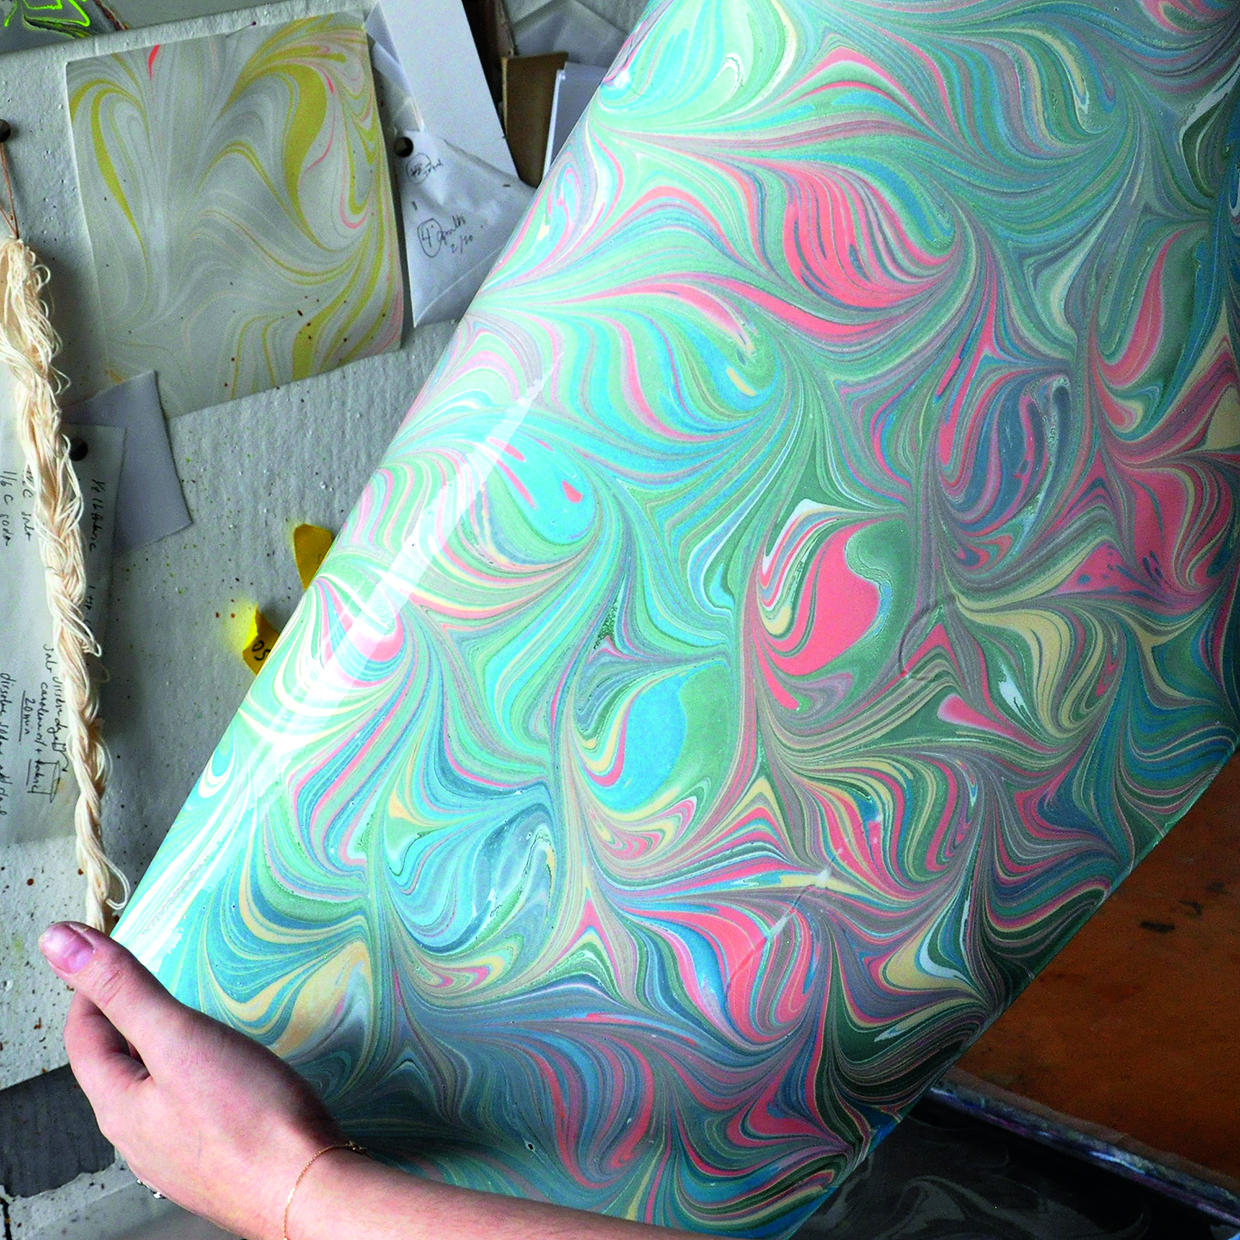 How to do paper marbling: a beginner's guide - Gathered